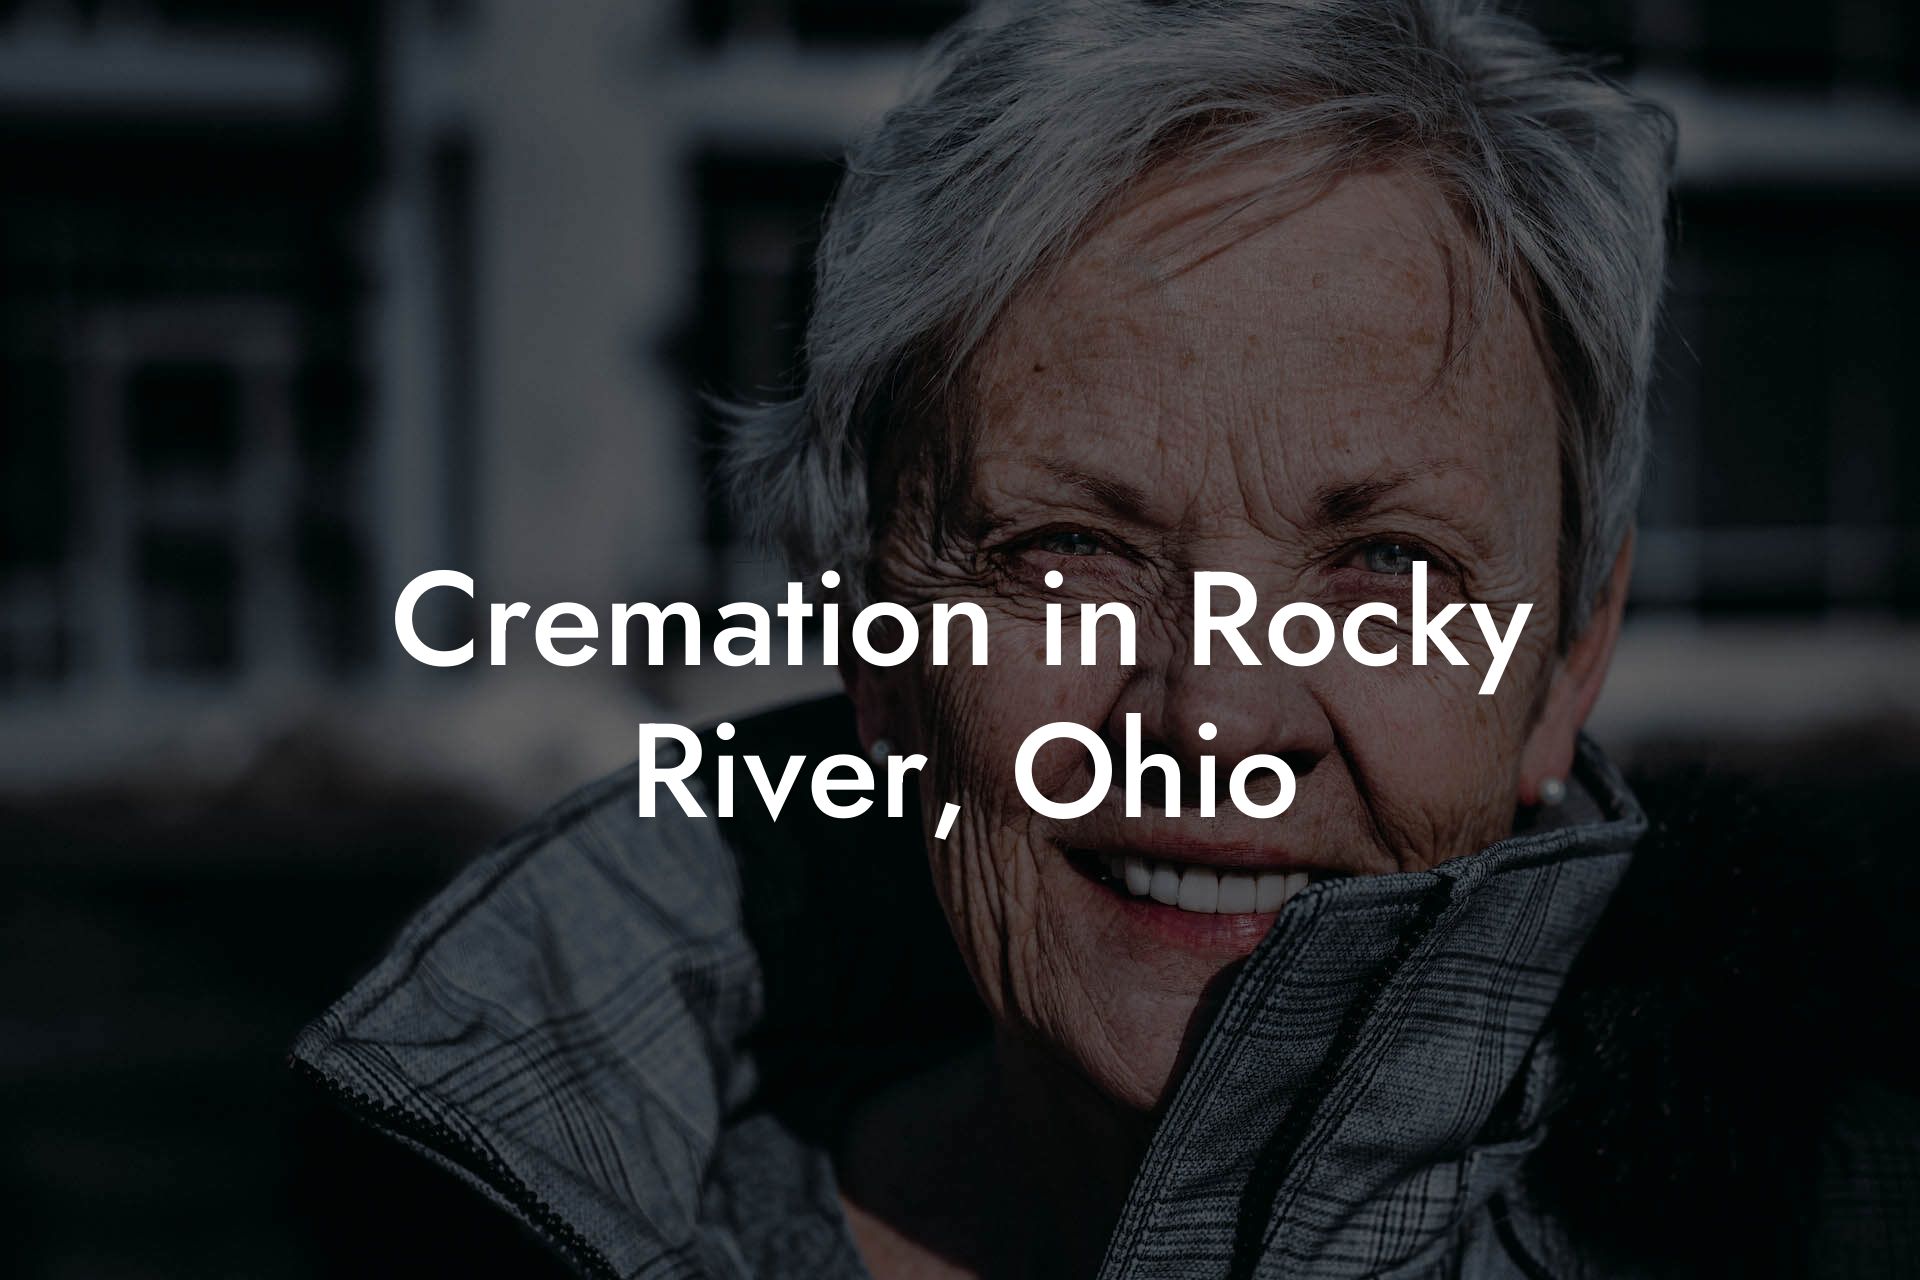 Cremation in Rocky River, Ohio